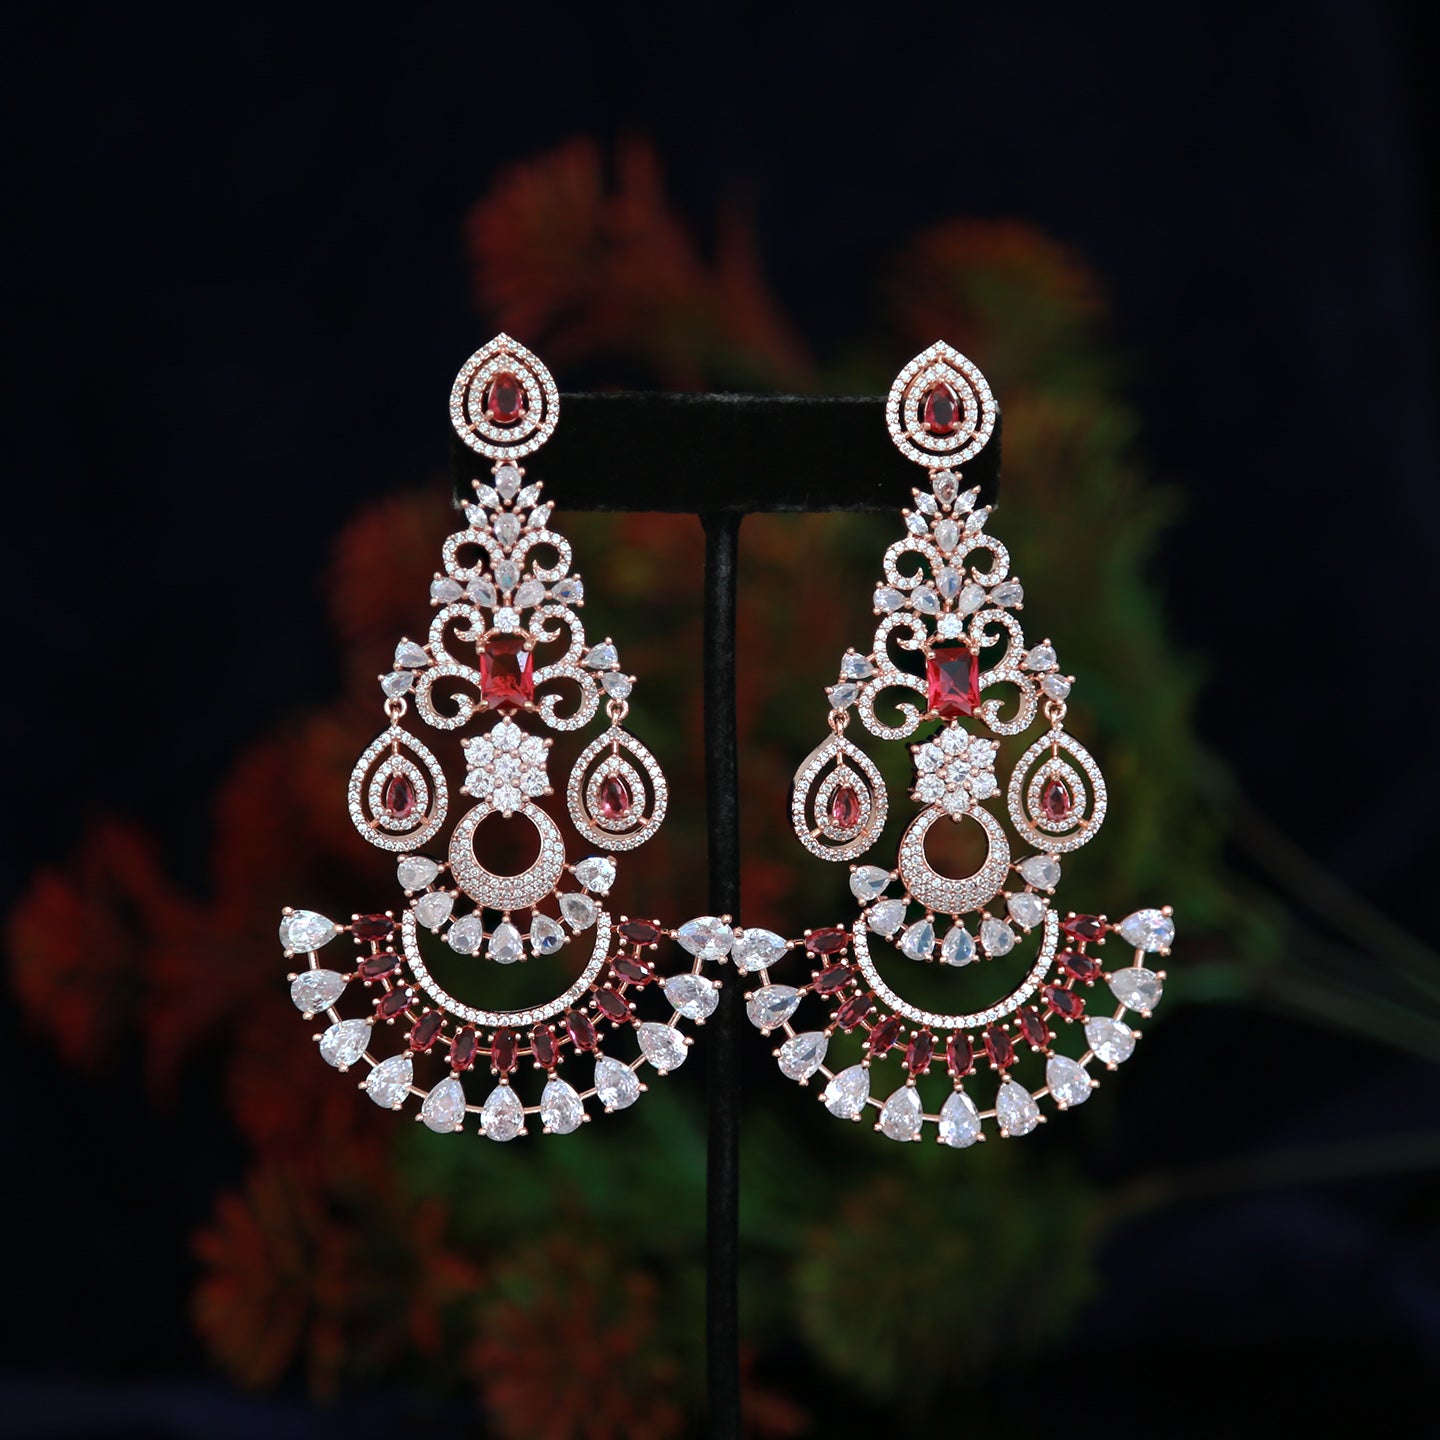 Rose Gold American Diamond Chandbali Earrings | Traditional Ethnic Party wear Earrings |High Quality Indian Jewelry Earrings | Gift for Her